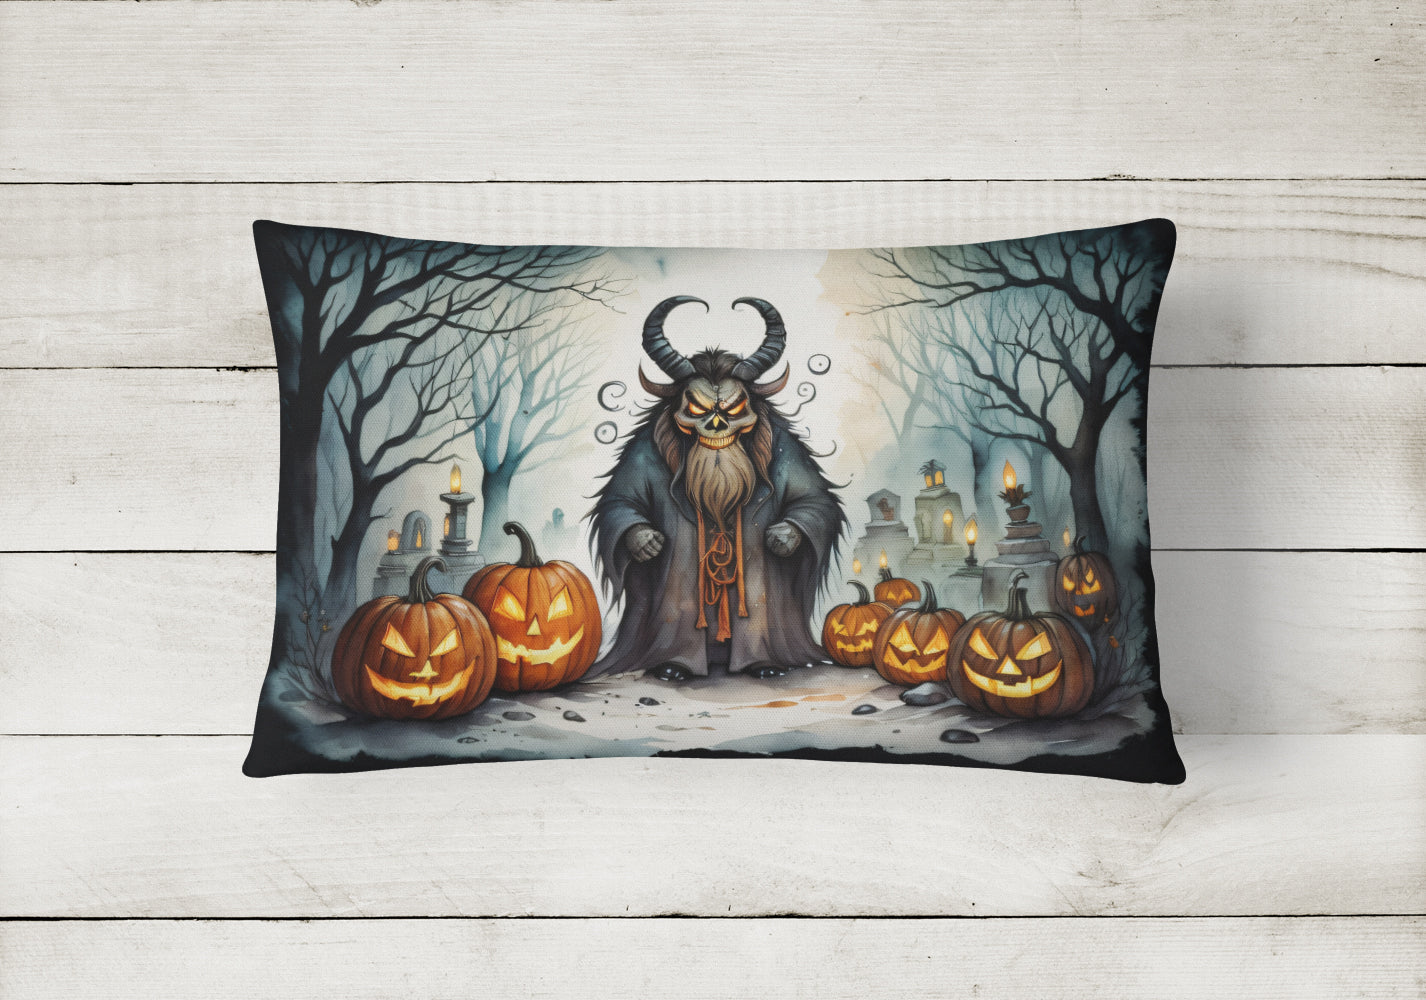 Buy this Krampus The Christmas Demon Spooky Halloween Fabric Decorative Pillow